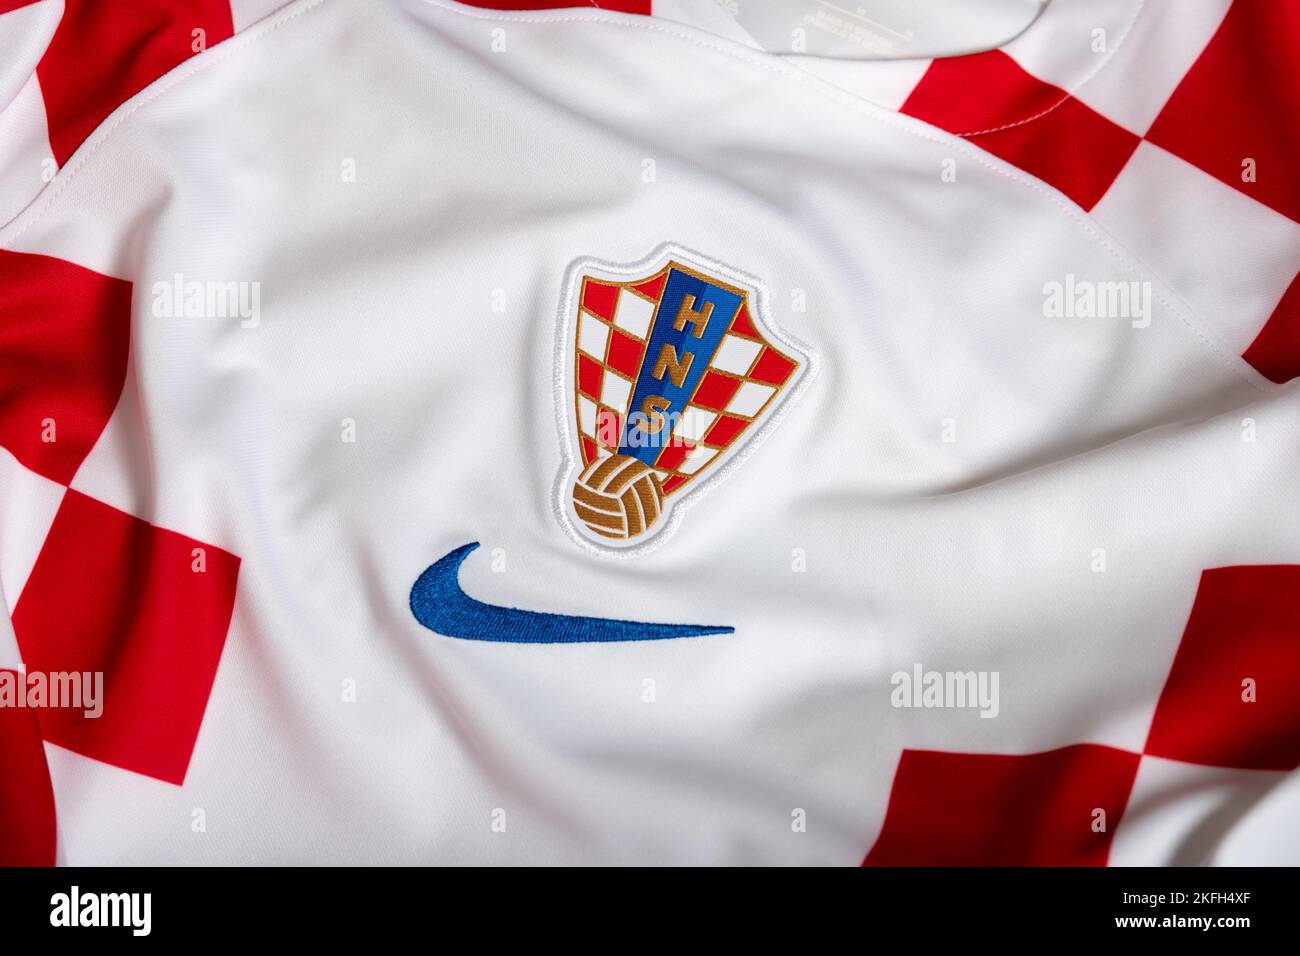 Close up of National Football team crest on home kit. FIFA World Cup Qatar 2022. Stock Photo